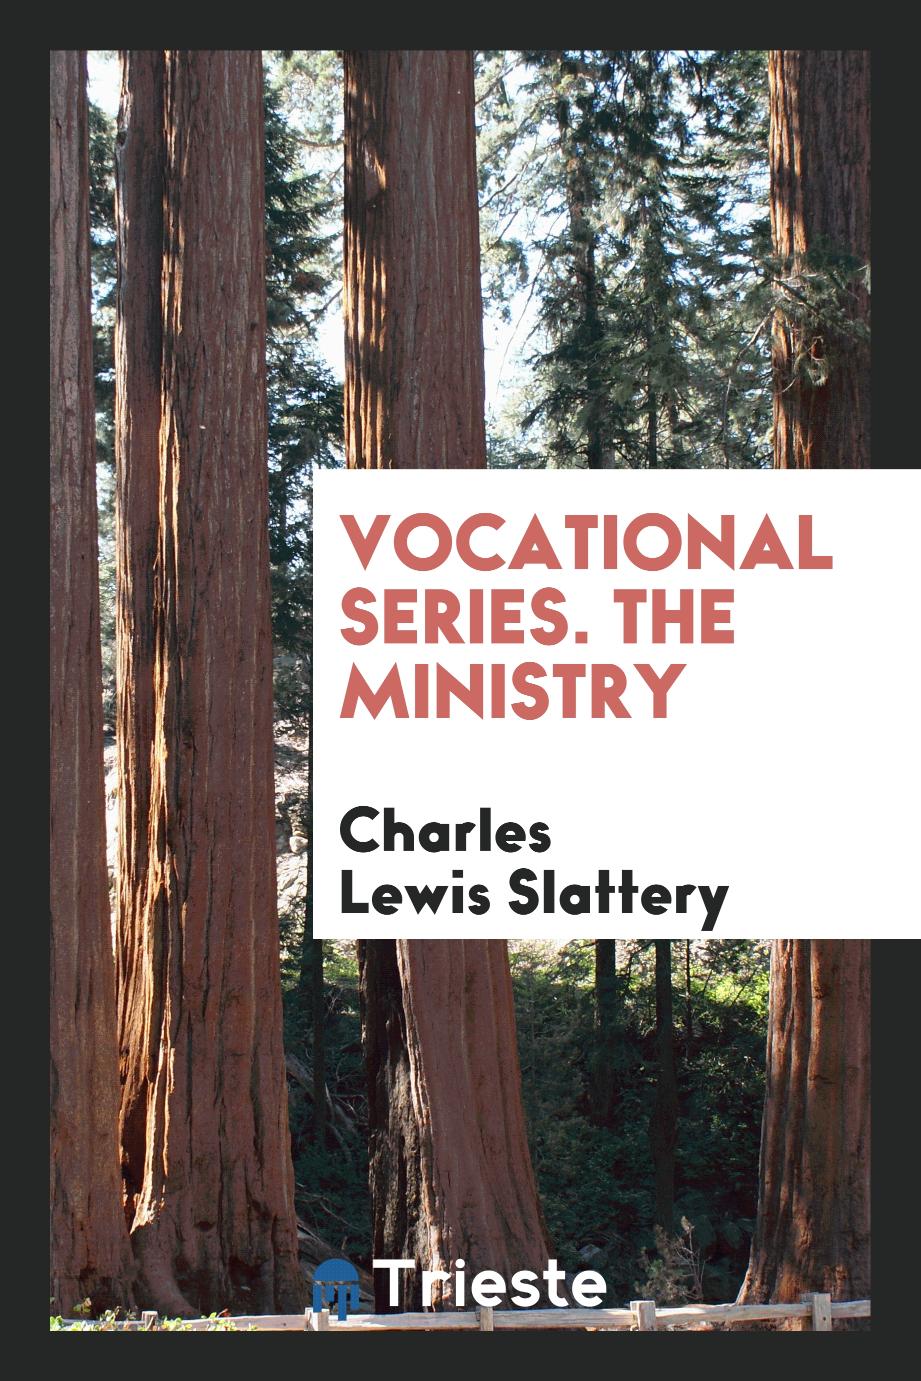 Vocational series. The ministry